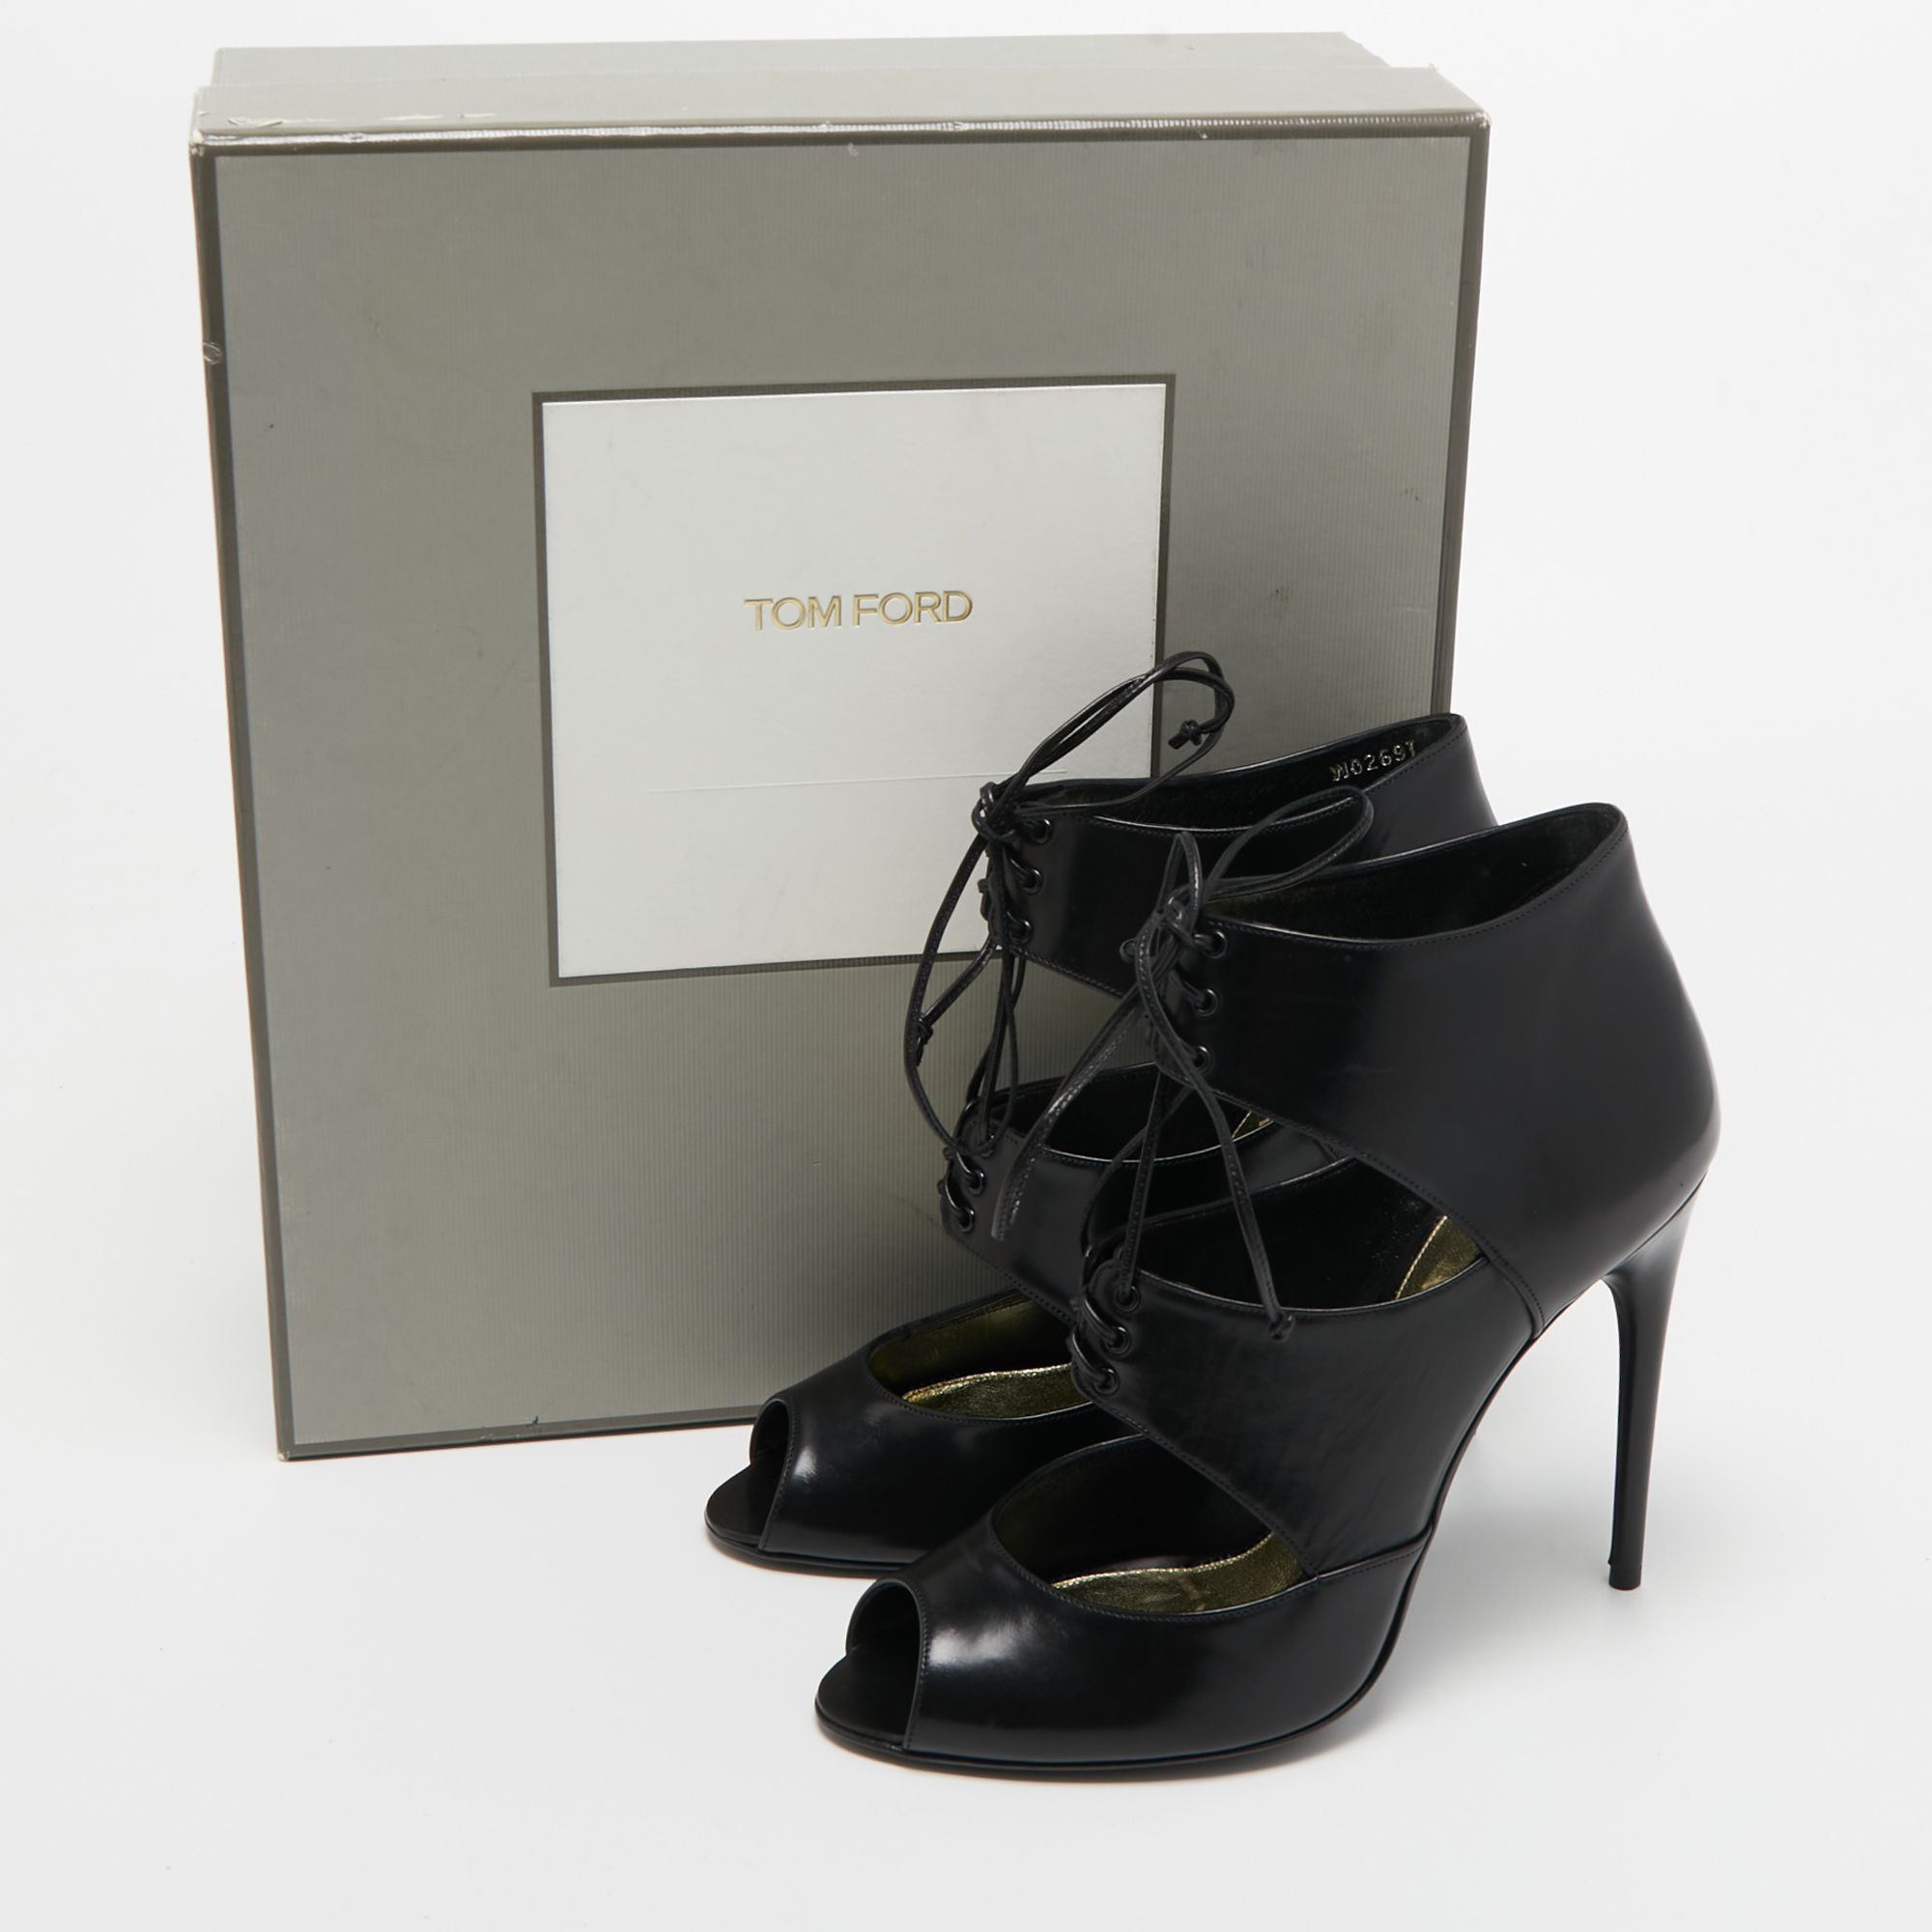 Tom Ford Black Leather Peep Toe Ankle Booties Size 39.5